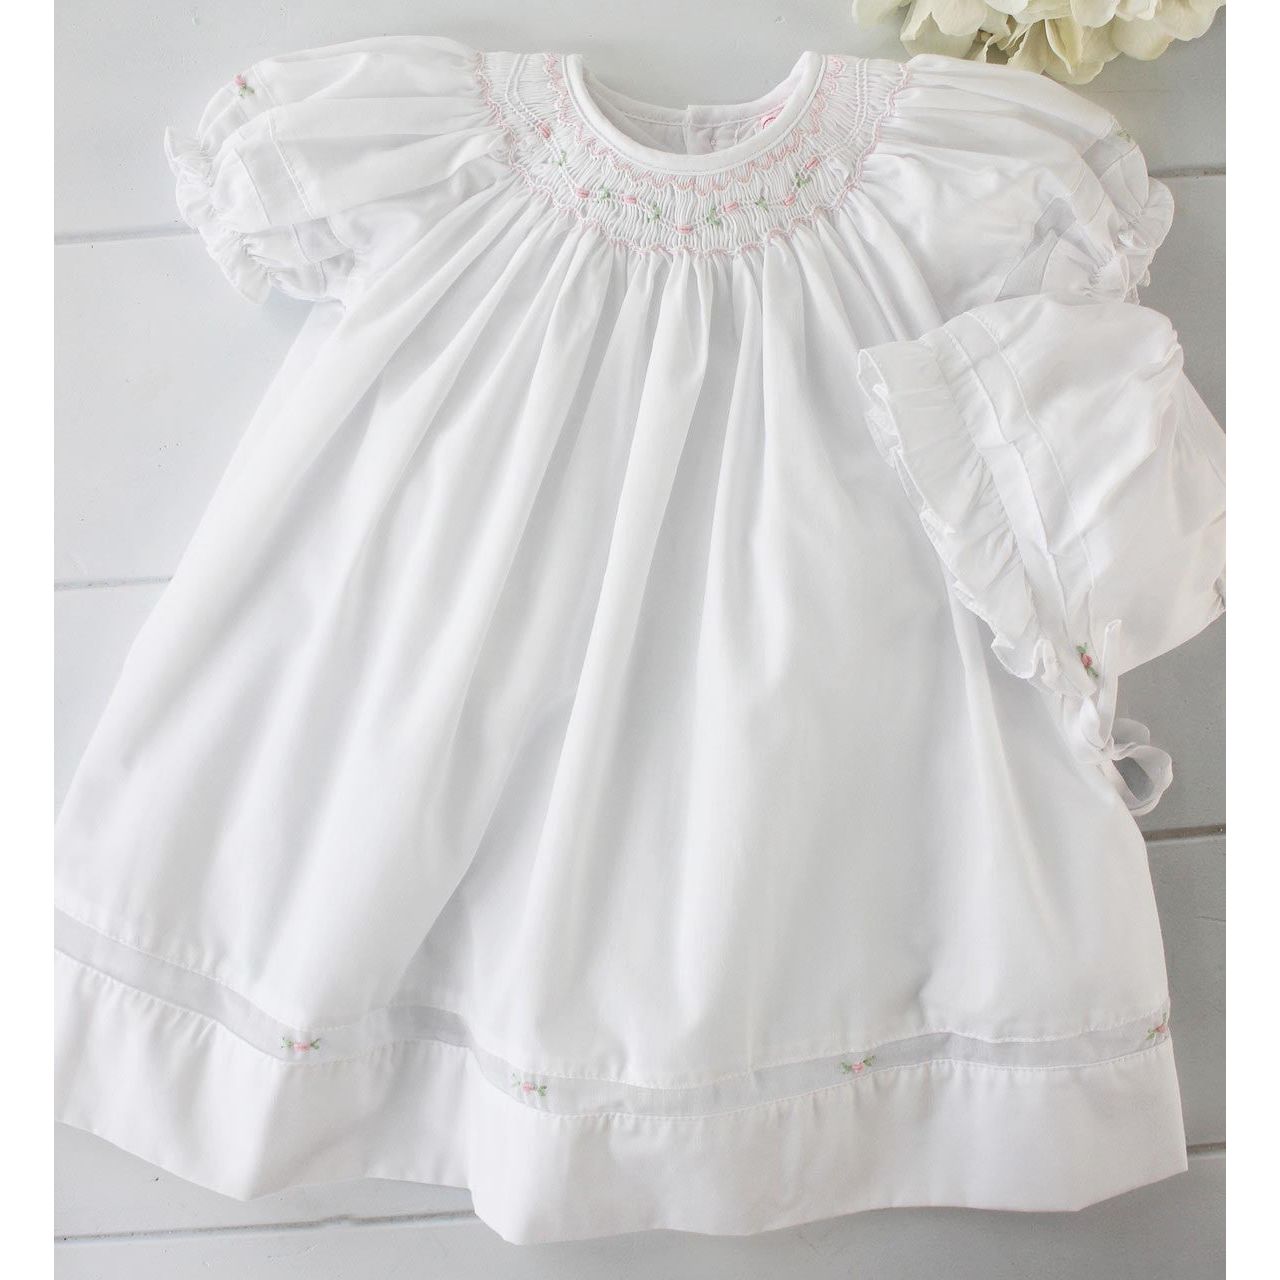 Girls White Smocked Daygown Dress & Bonnet Pink Flowers